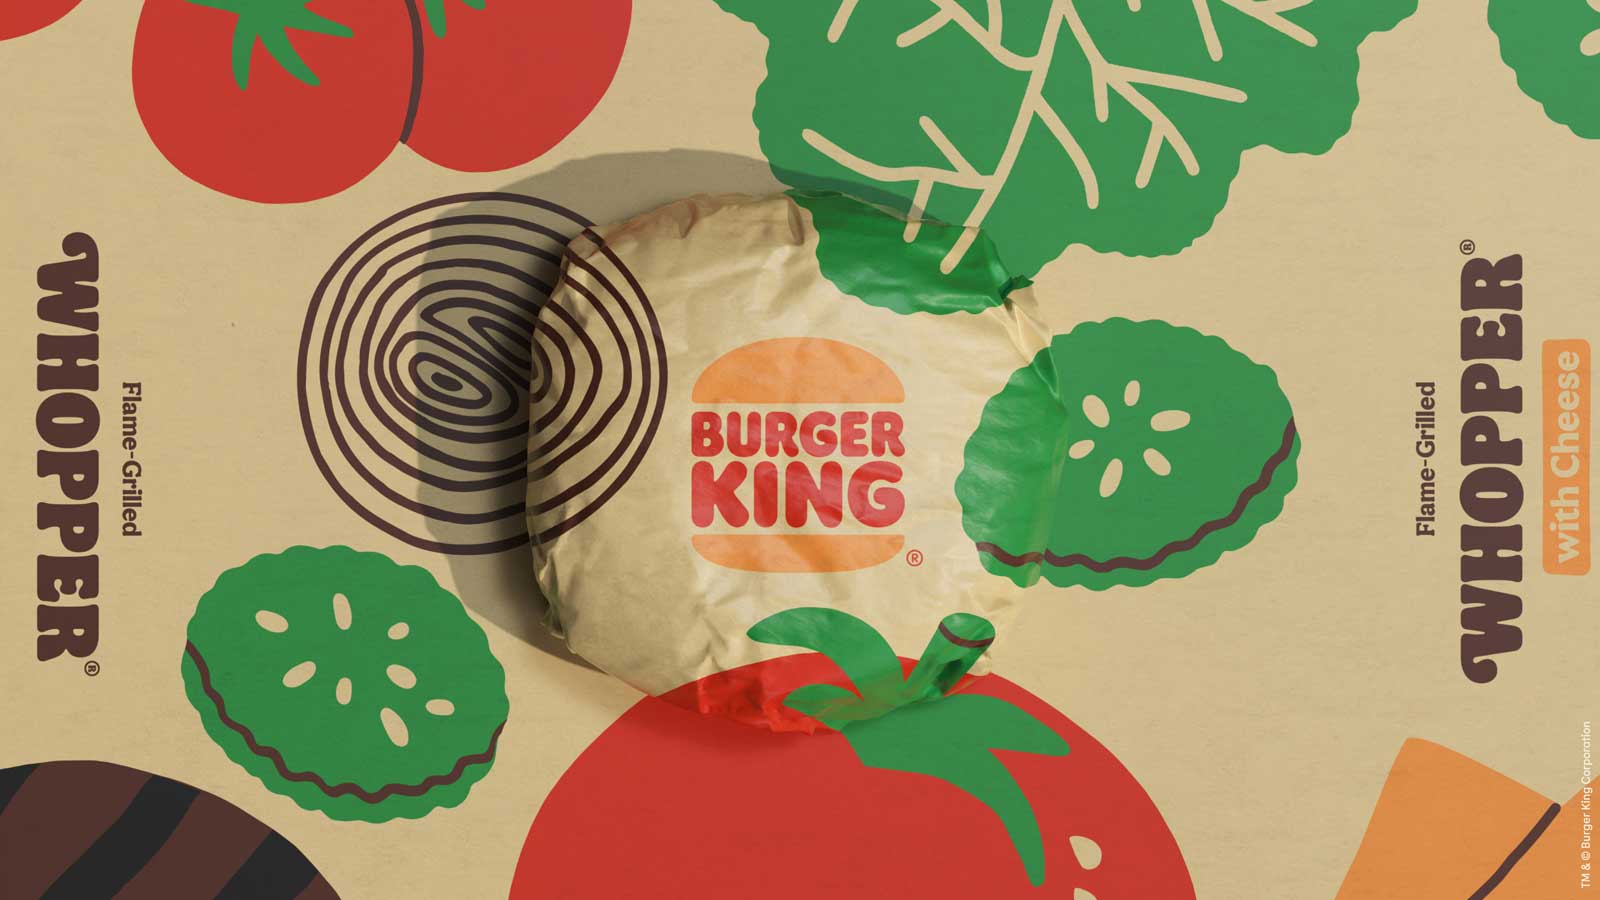 Burger King evolves visual brand identity marking the first complete rebrand in over 20 years 